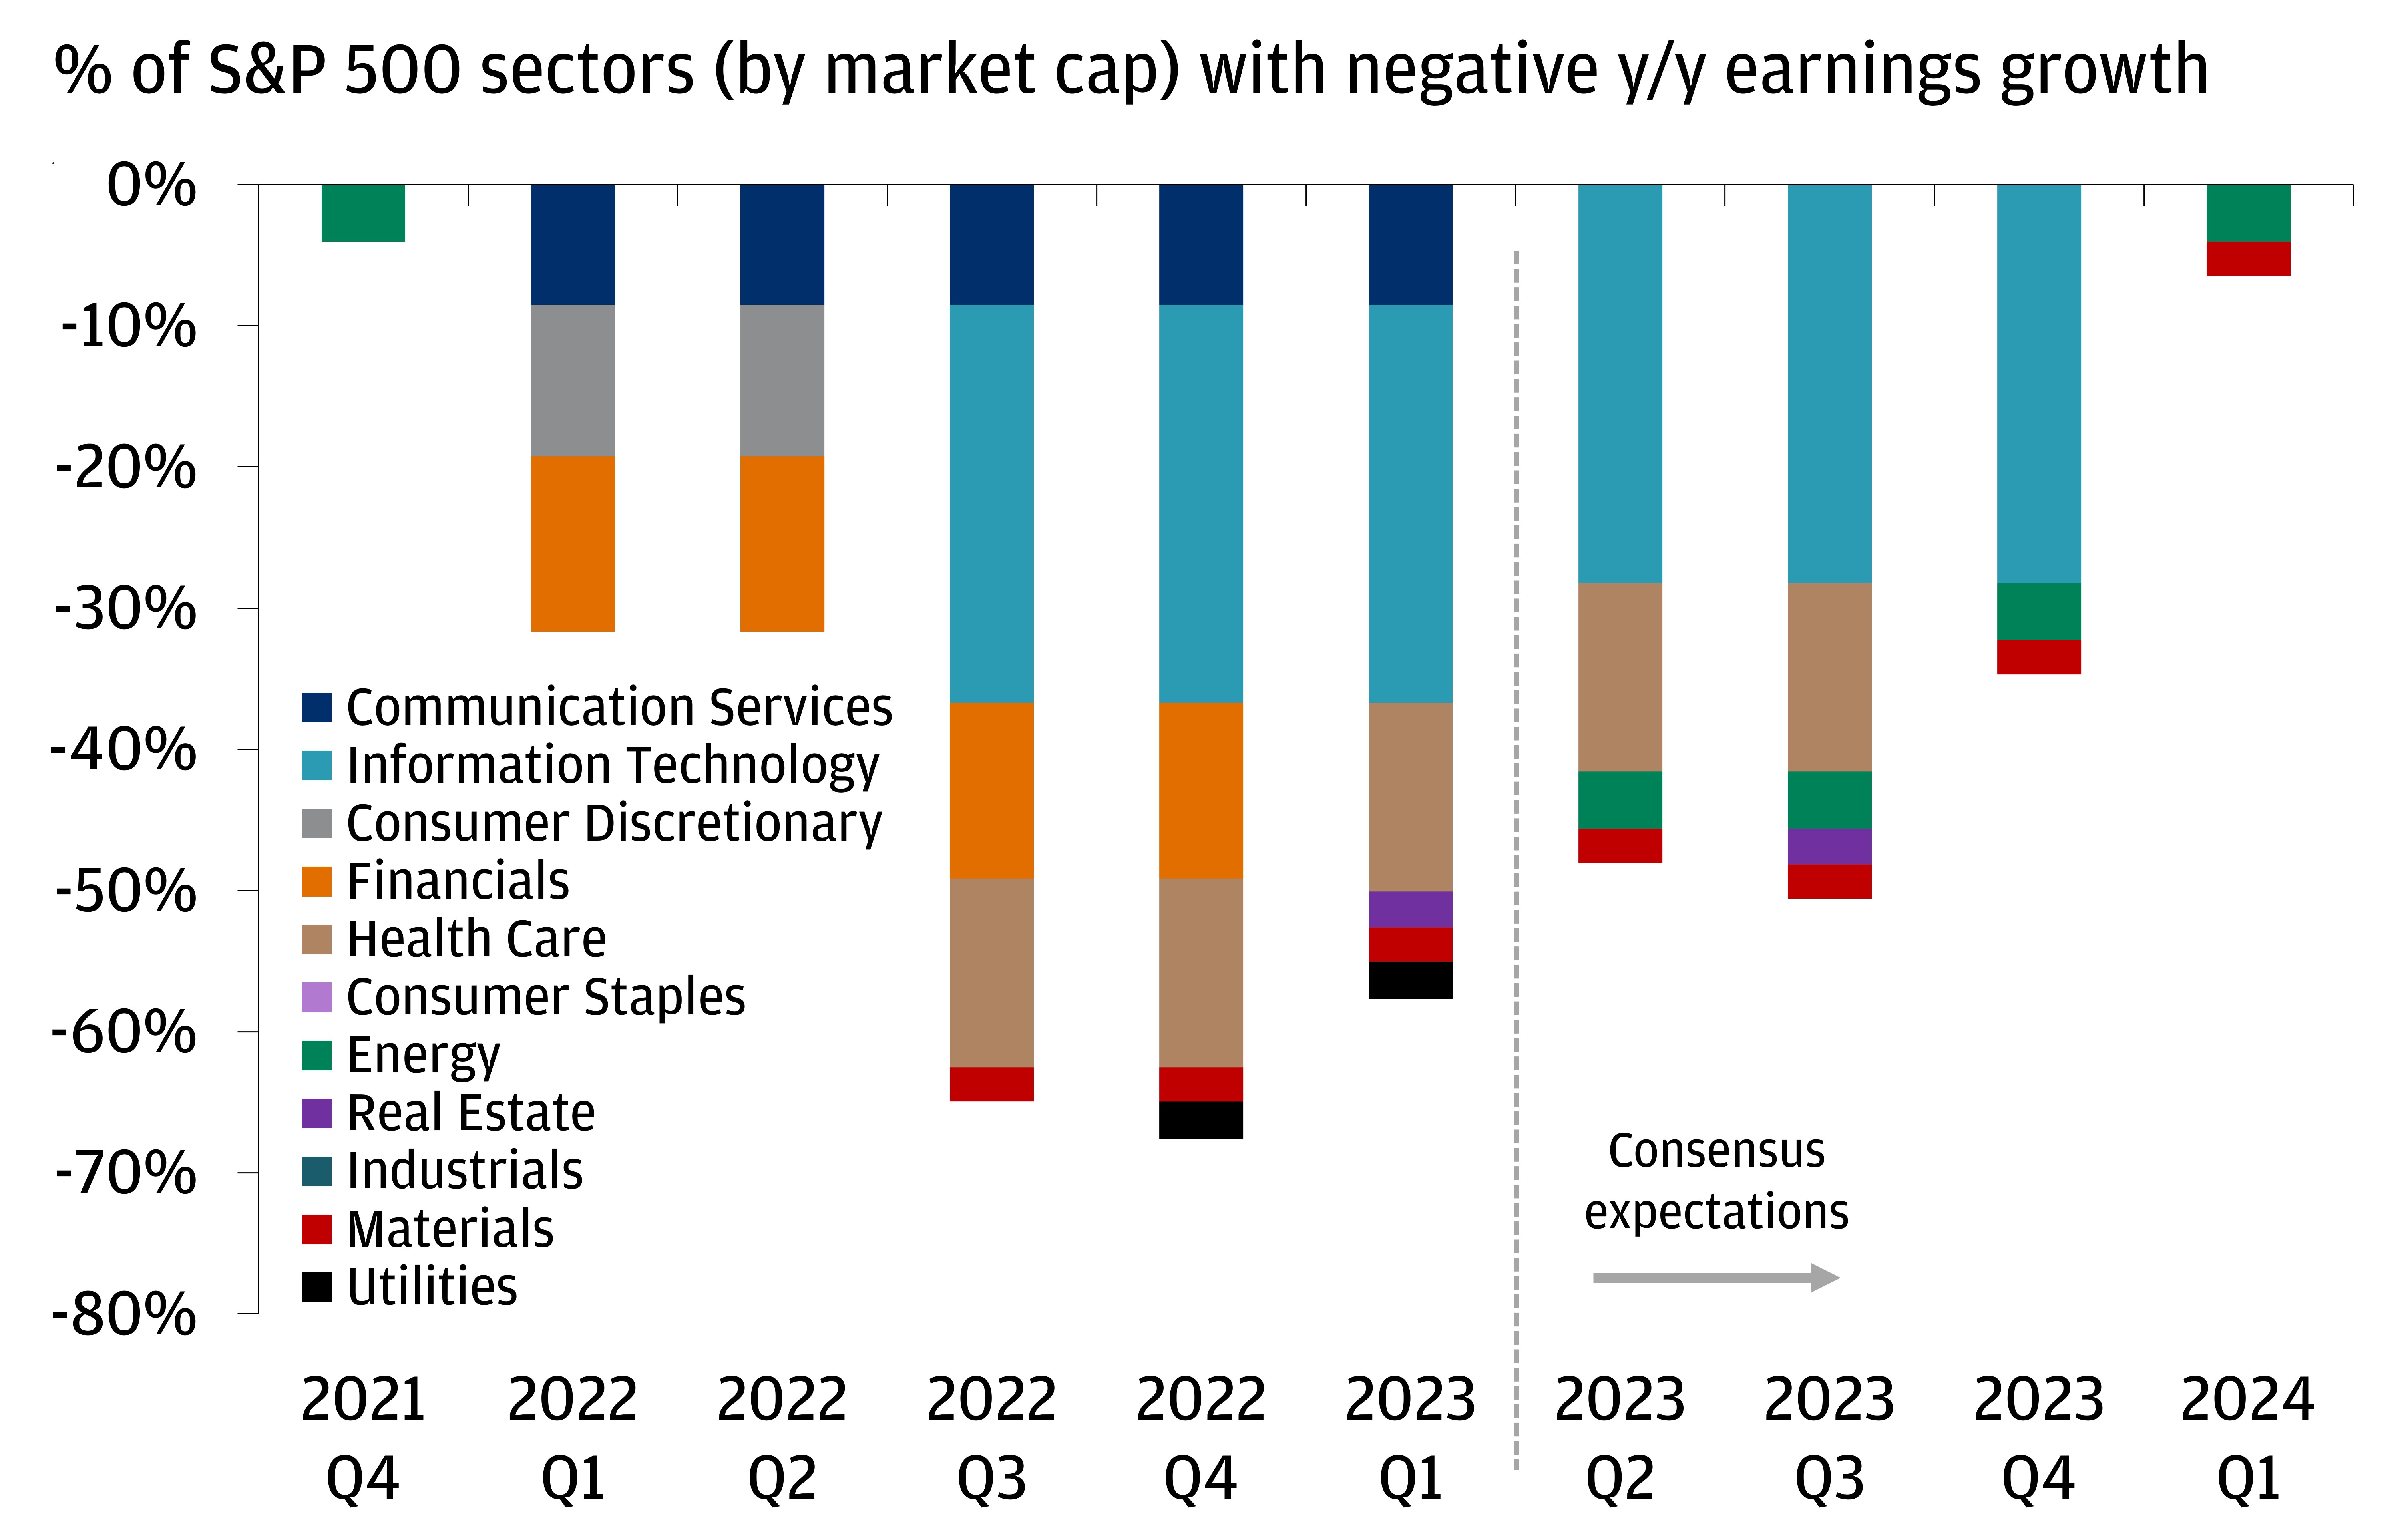 This chart shows the percentage of S&P 500 sectors, weighted by market cap, with negative year-over-year earnings growth from Q4 2021 to Q1 2023 and consensus expectations from Q2 2023 to Q1 2024.